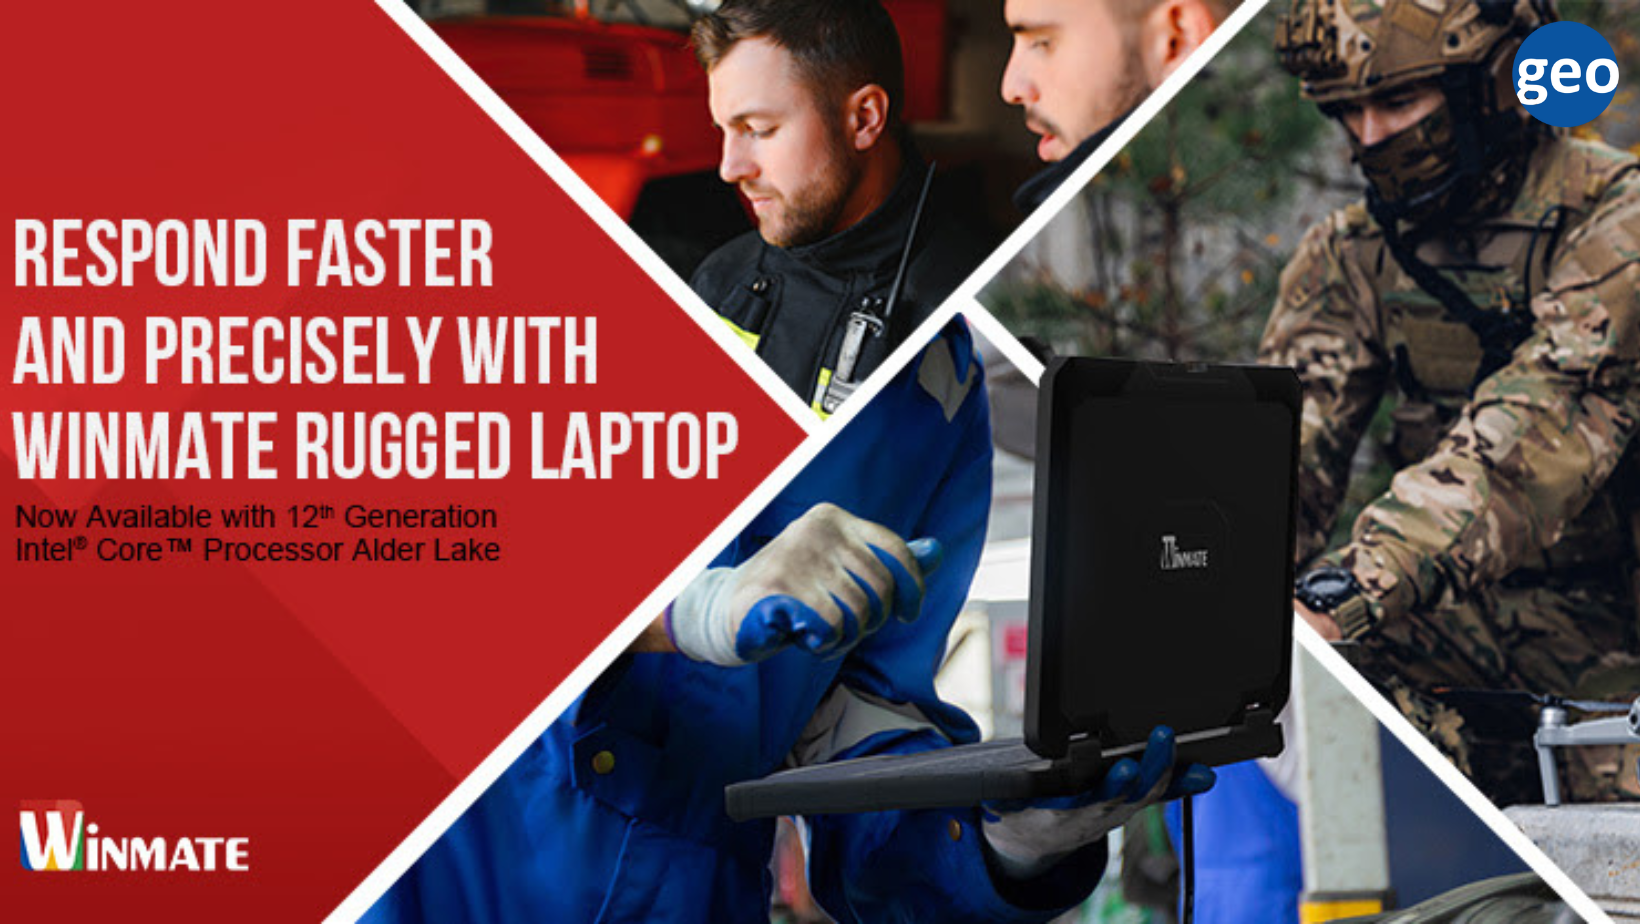 Winmate Fully Rugged Notebook Laptop with Intel Core i7 powered by Intel Alder Lake processor. Reliable, versatile.